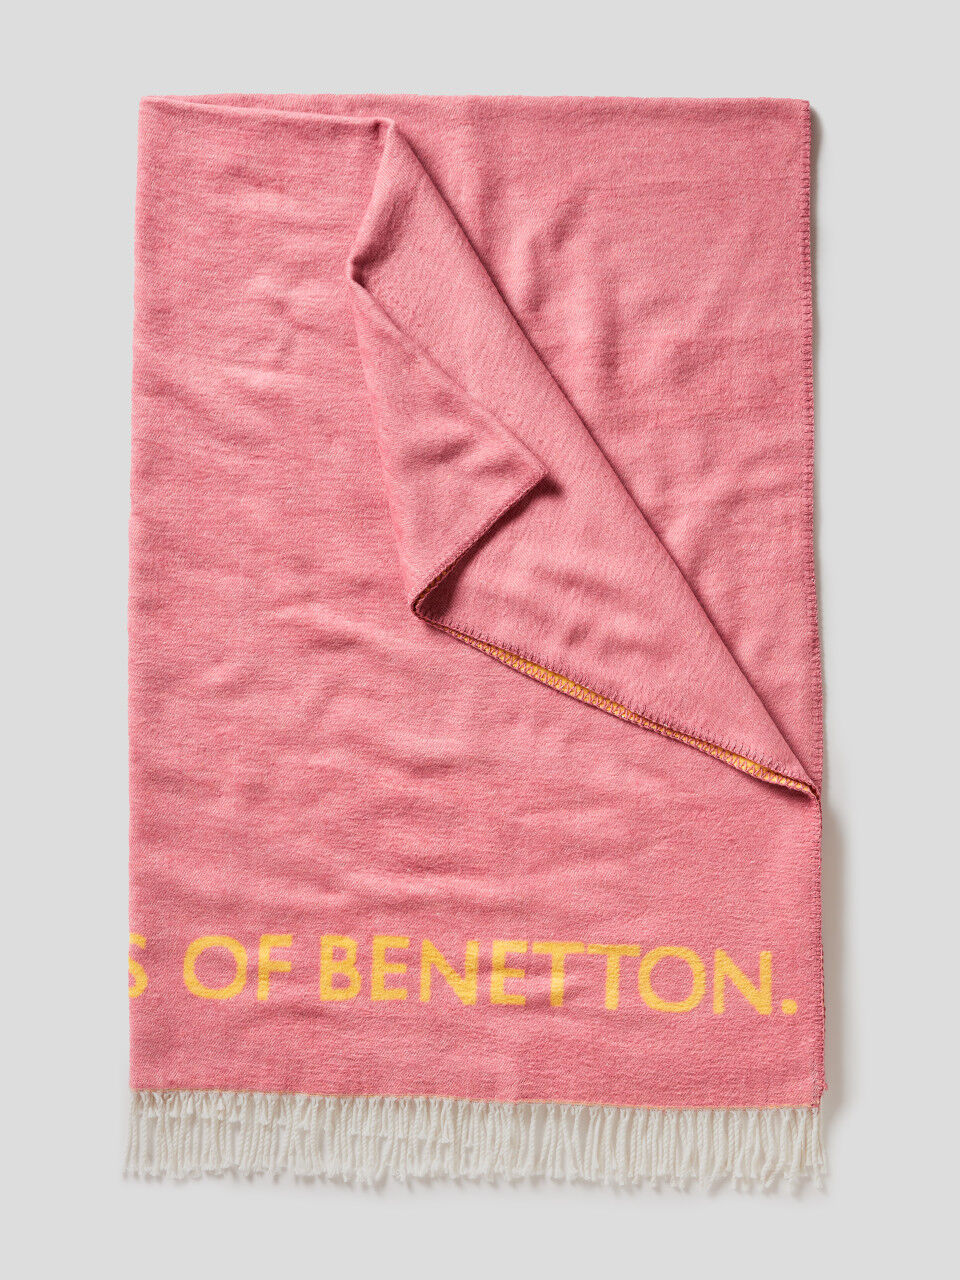 Casa Benetton Plaid and Blanket Collection